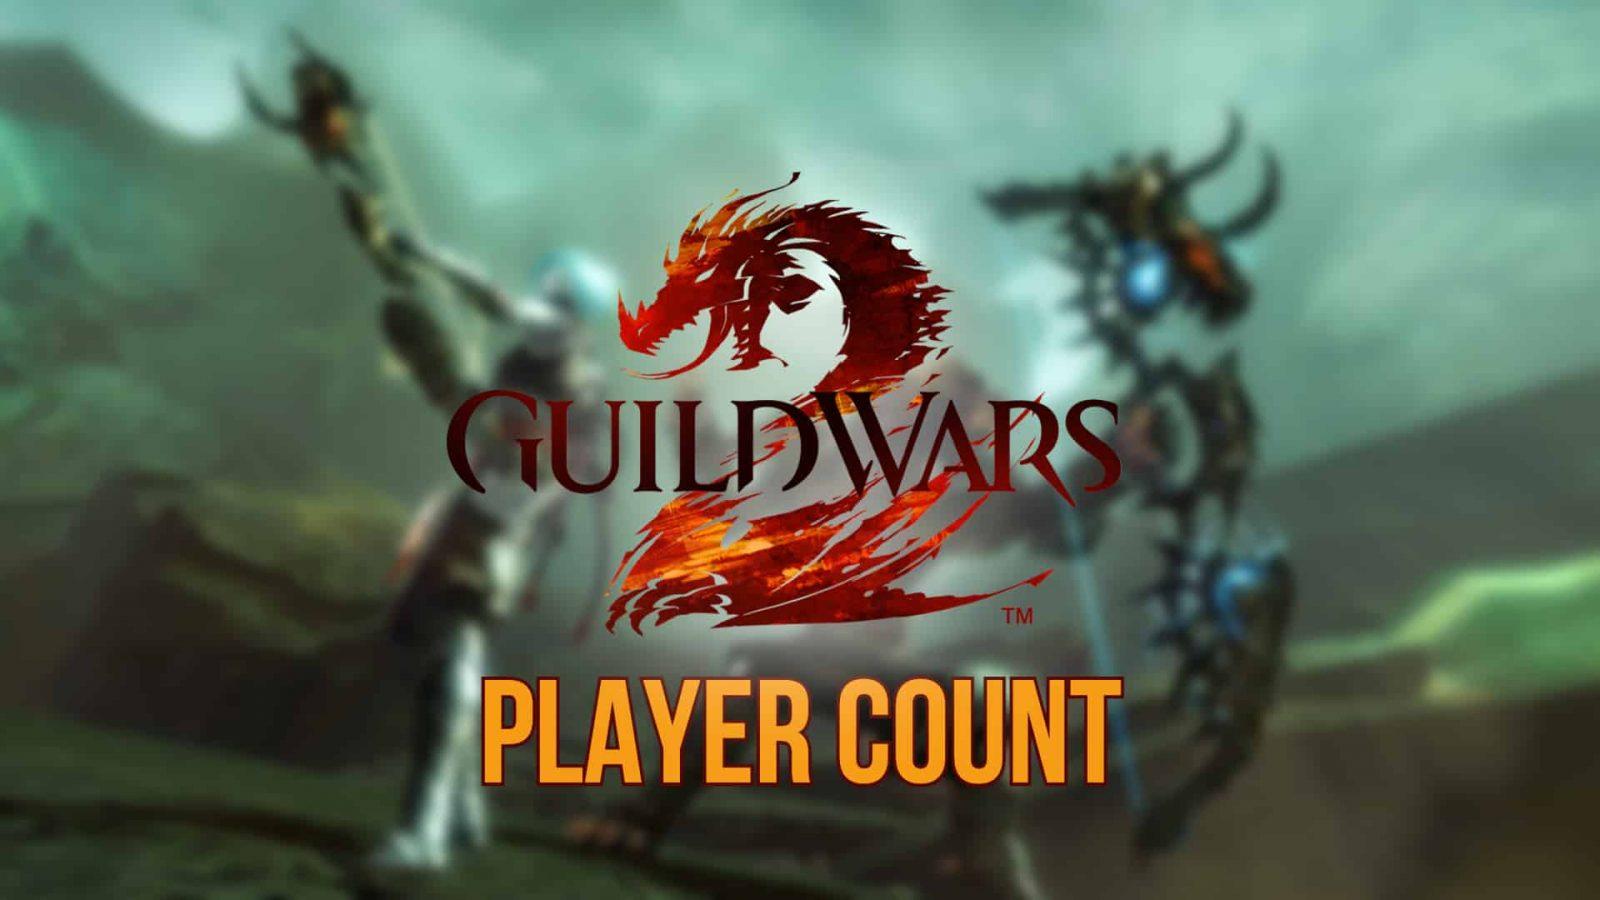 Low player count in online game